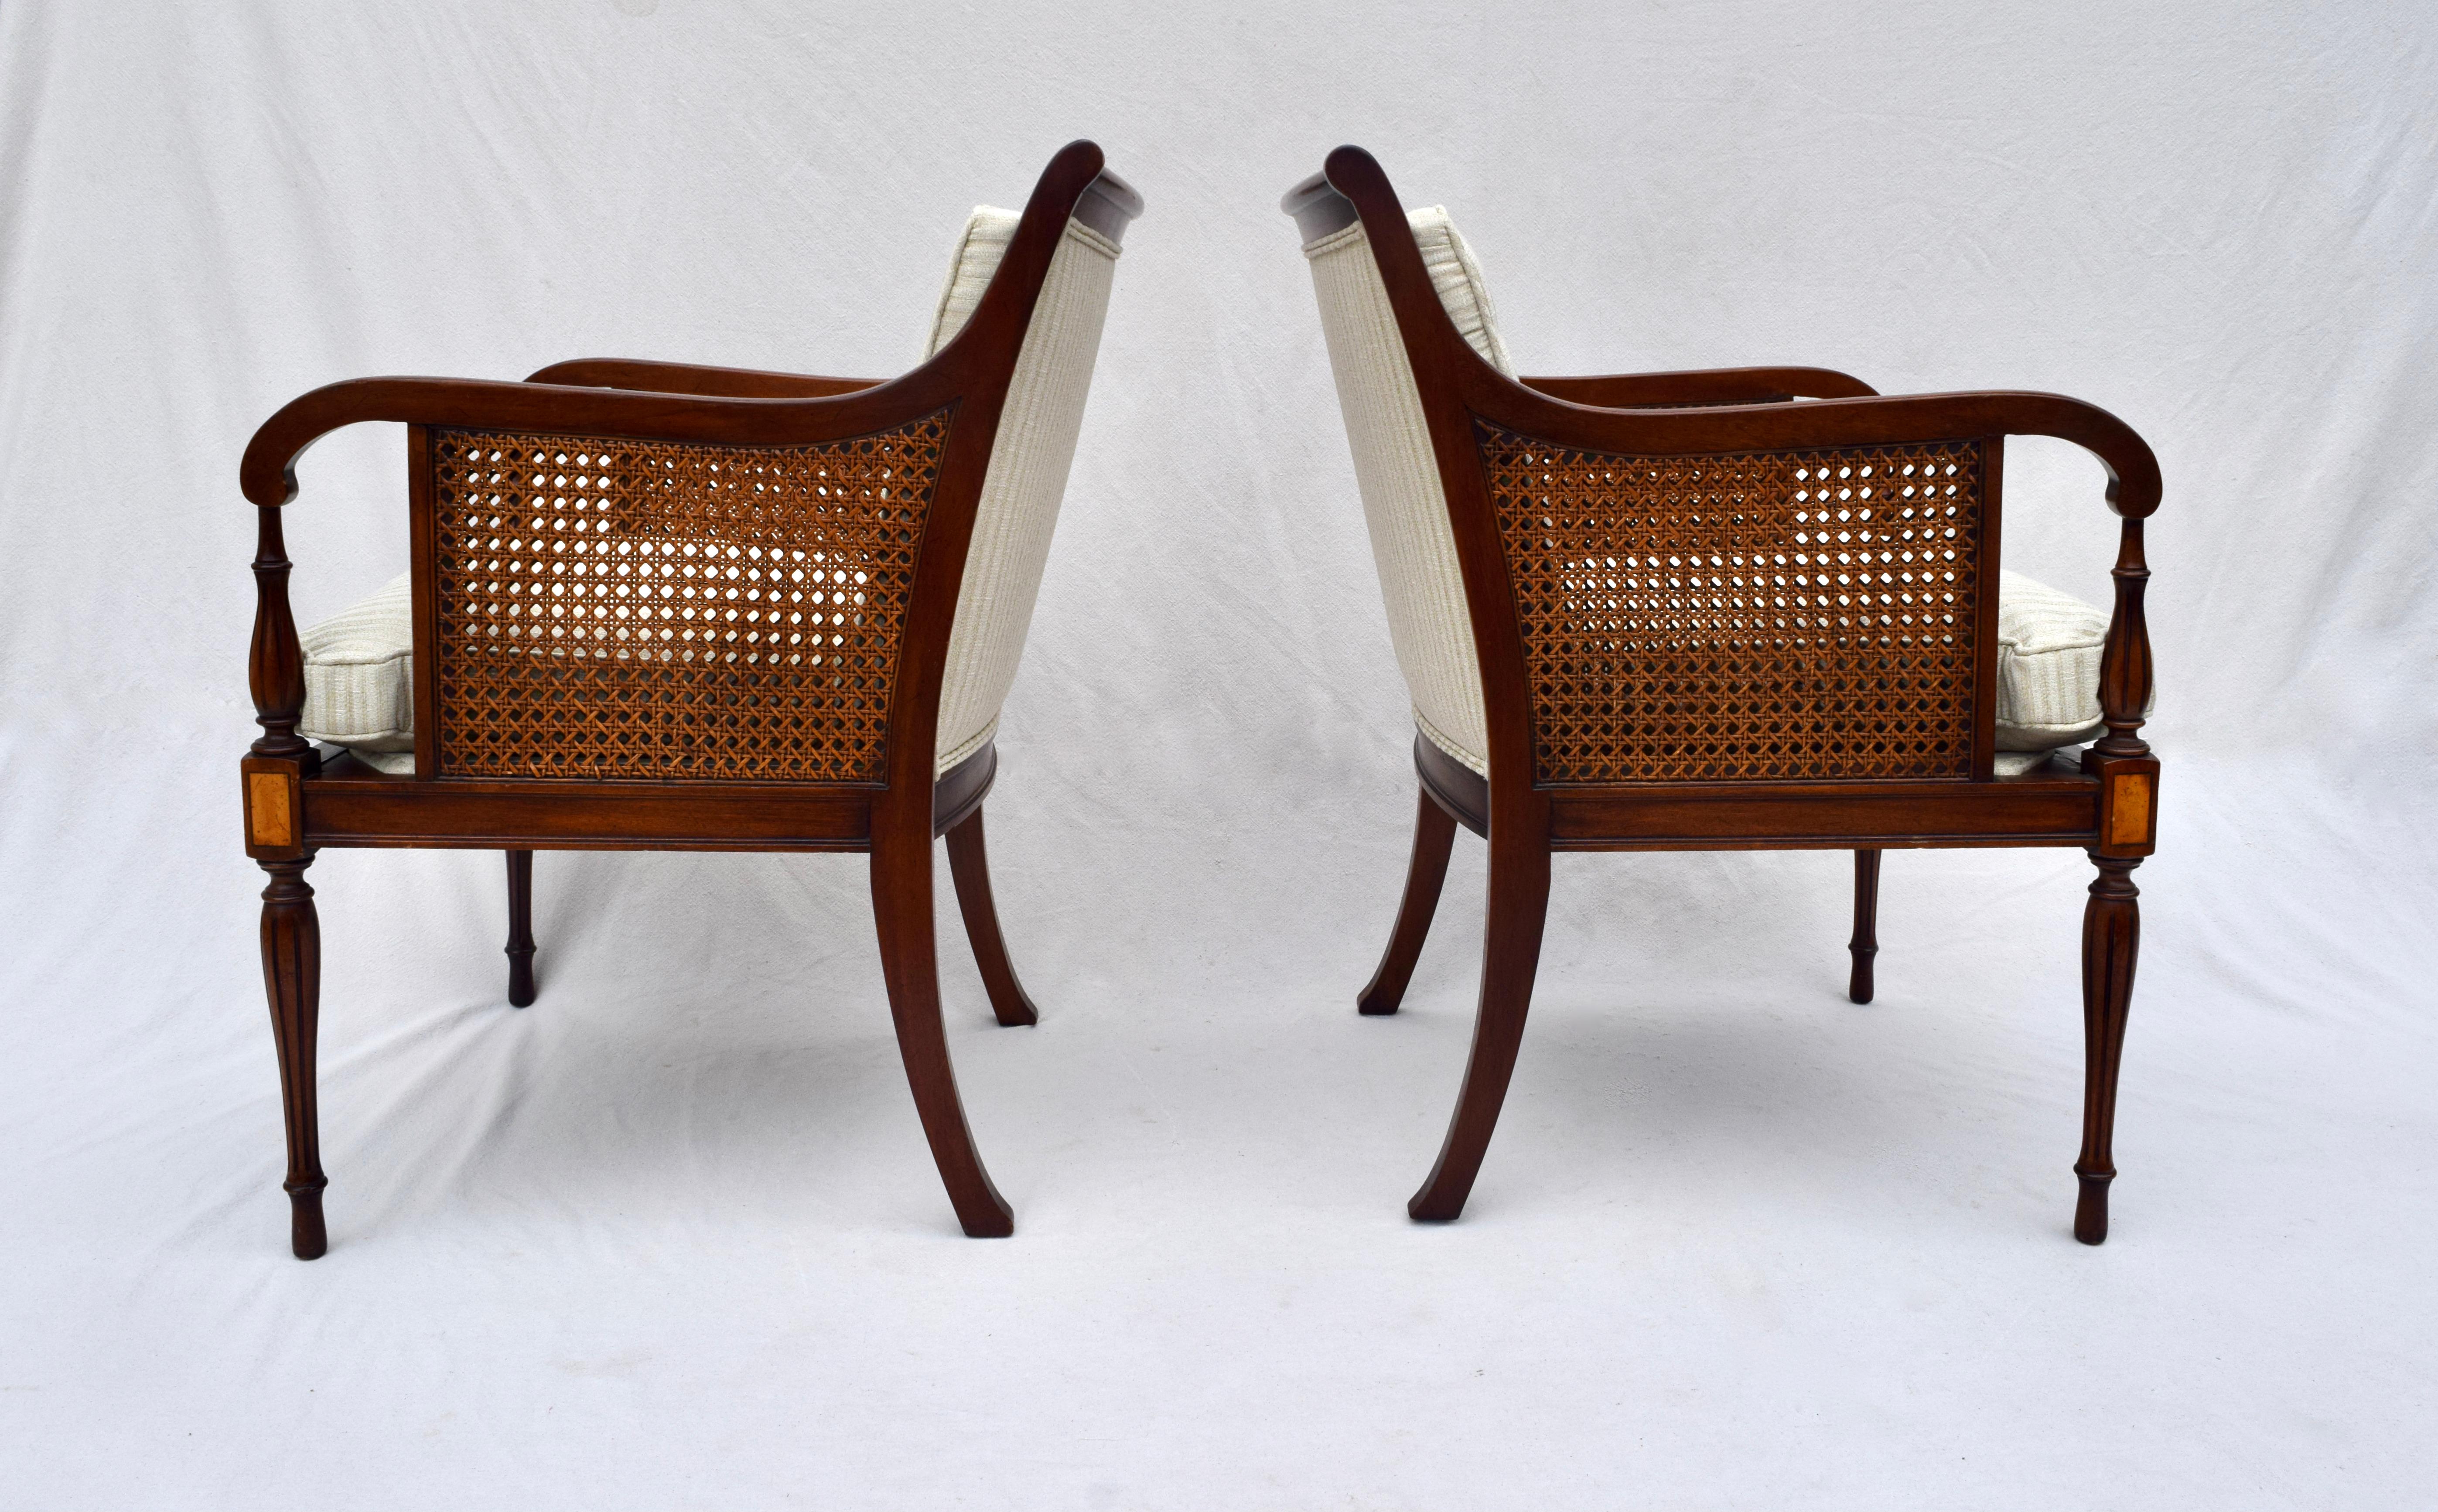 A pair of double caned, George III Regency style mahogany & satinwood armchairs with tapered reed & turned legs. Beautifully maintained, the pair is fully hand detailed, the caning being immaculate. New silk stripe upholstery includes button tufted